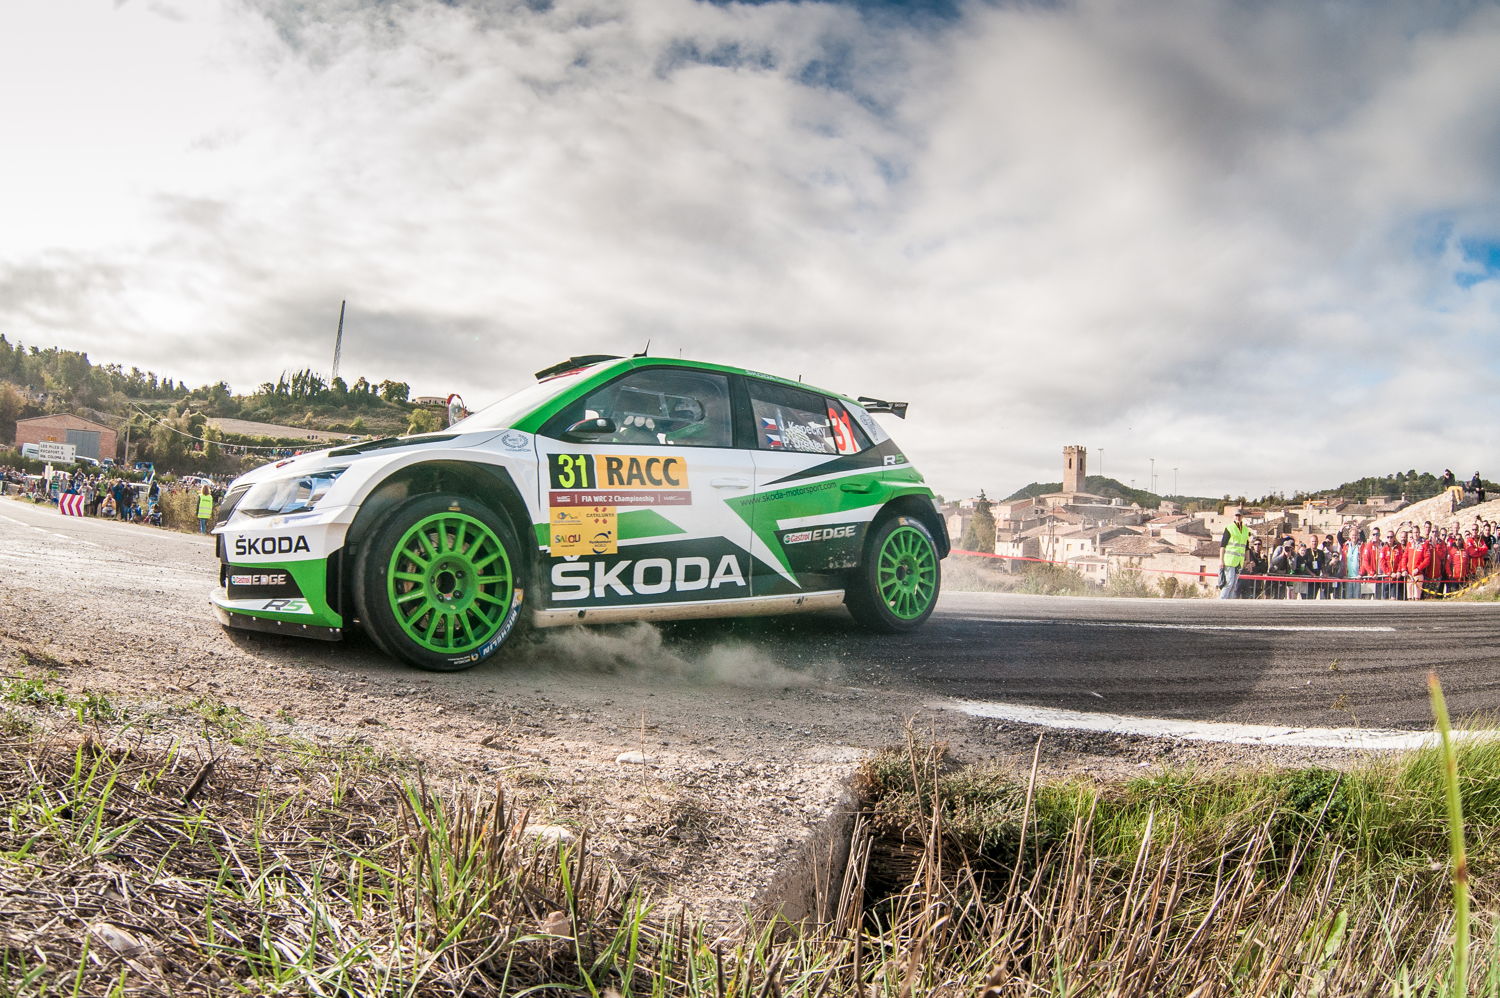 In WRC 2 Jan Kopecký/Pavel Dresler (ŠKODA FABIA R5) won all seven stages of the day moving into second in the category at RallyRACC Catalunya – Rally de España